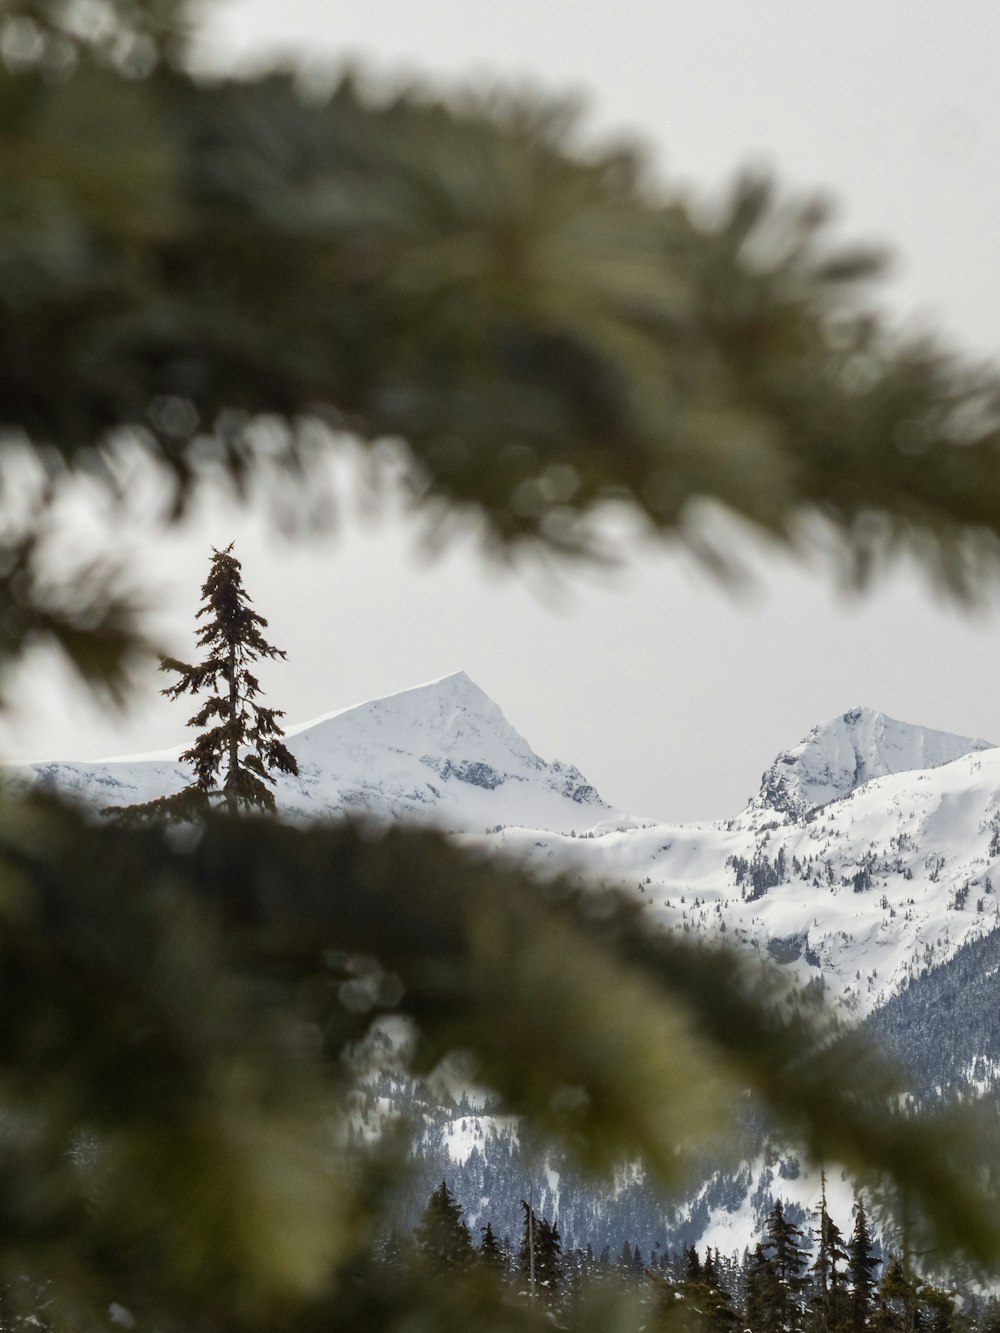 a view of a snowy mountain range through the branches of a pine tree